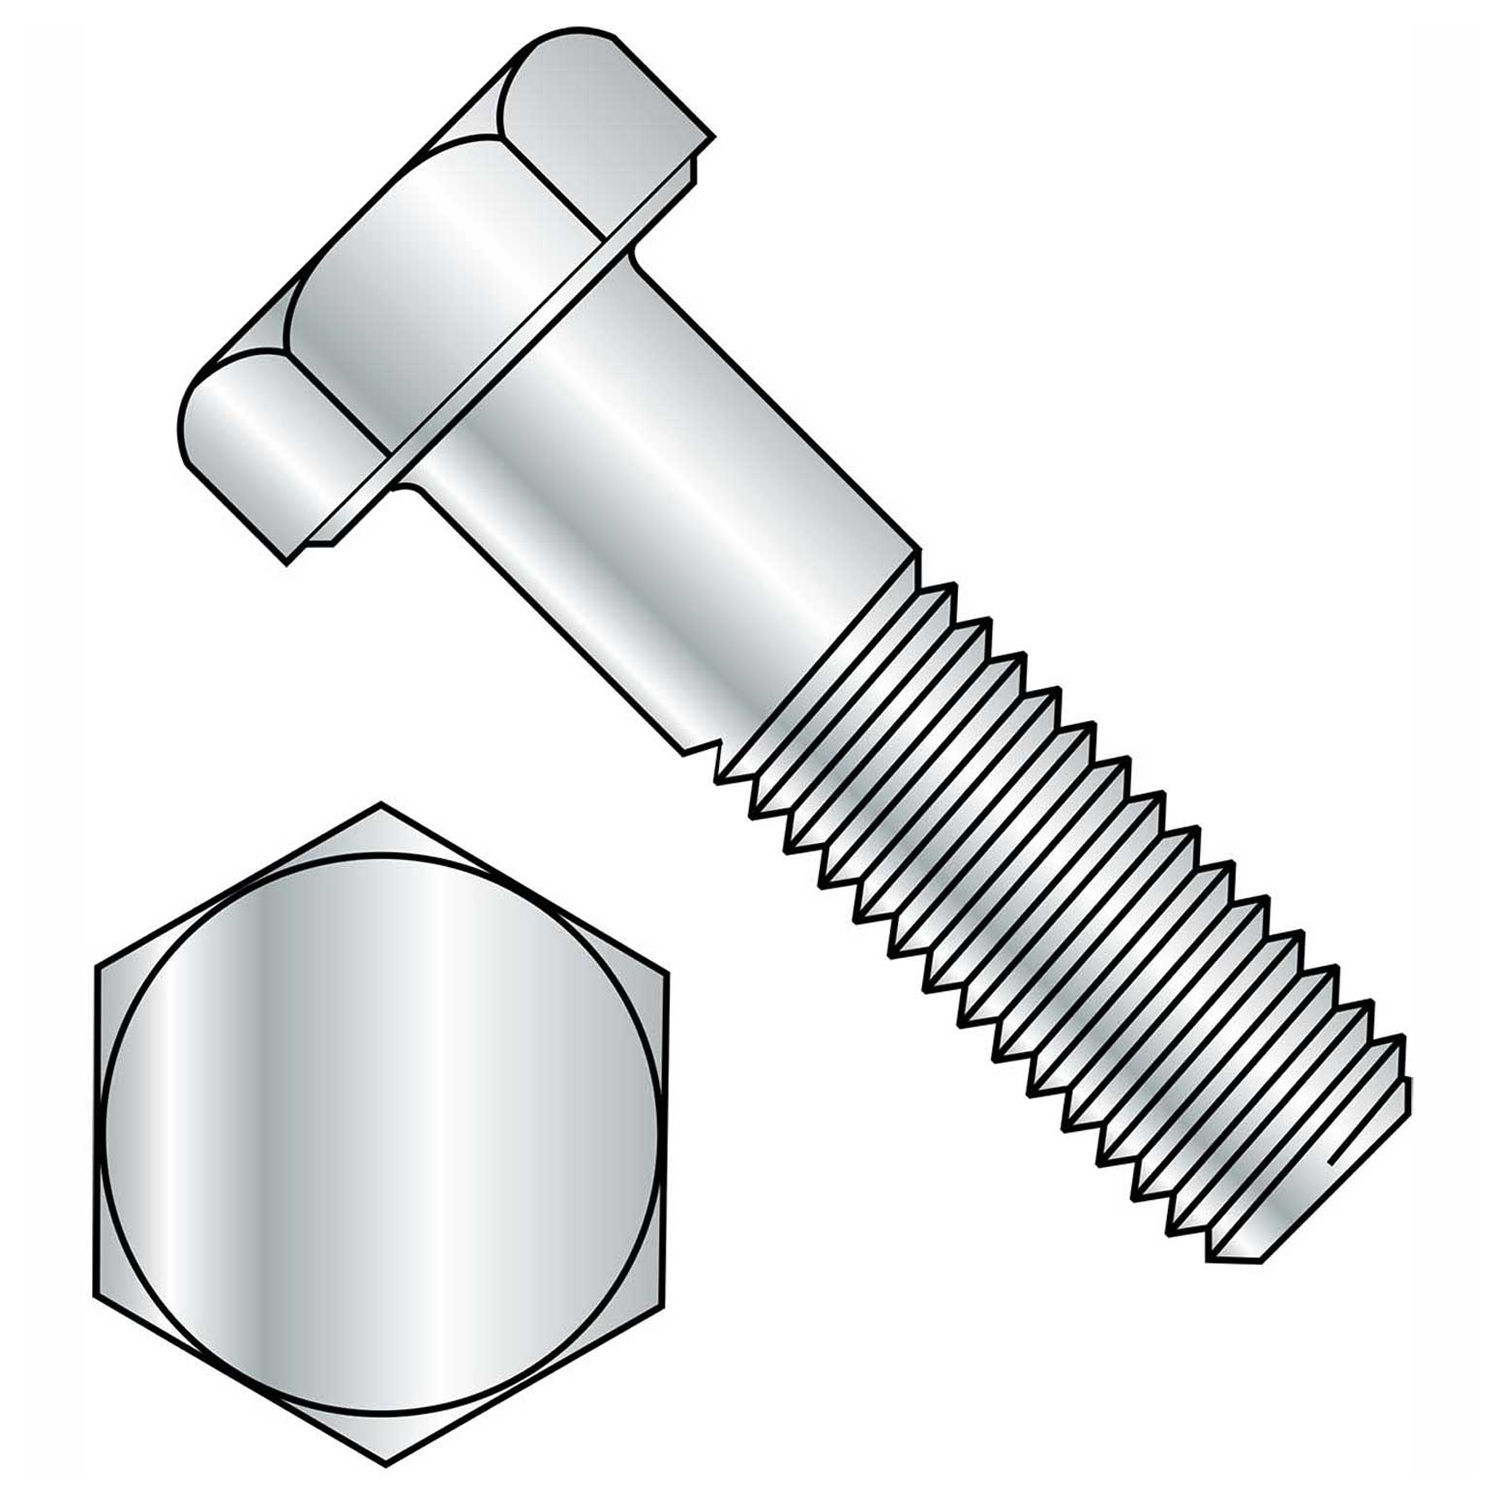 A 325M HEAVY HEX BOLT